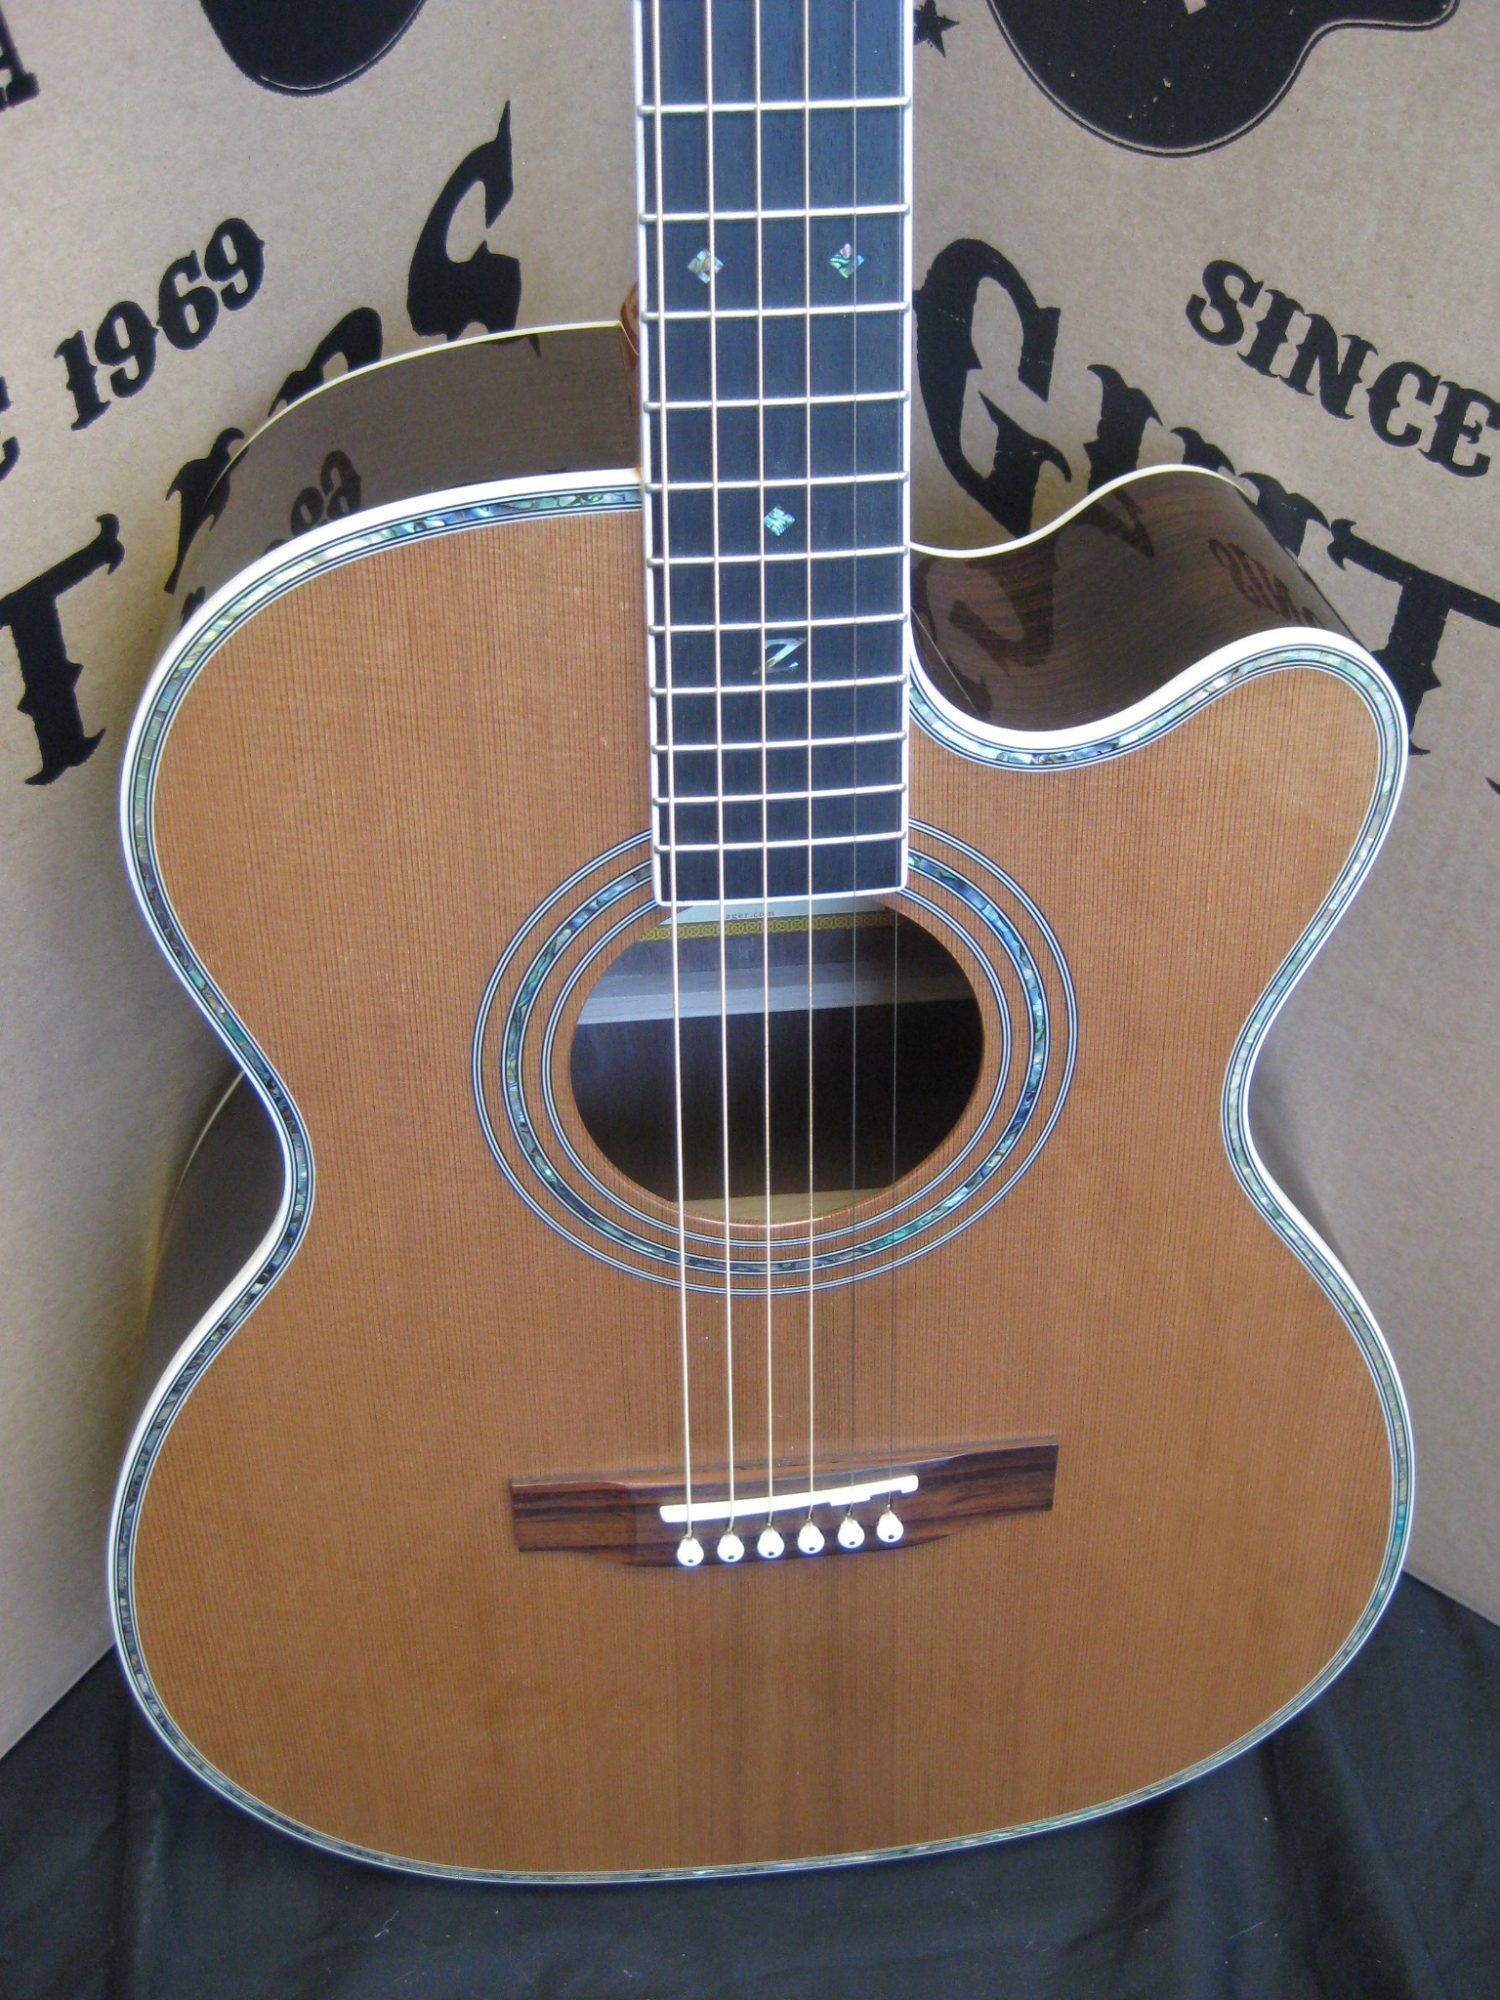 00012-80ceom-acoustic-electric-discount-guitar-zager-guitars